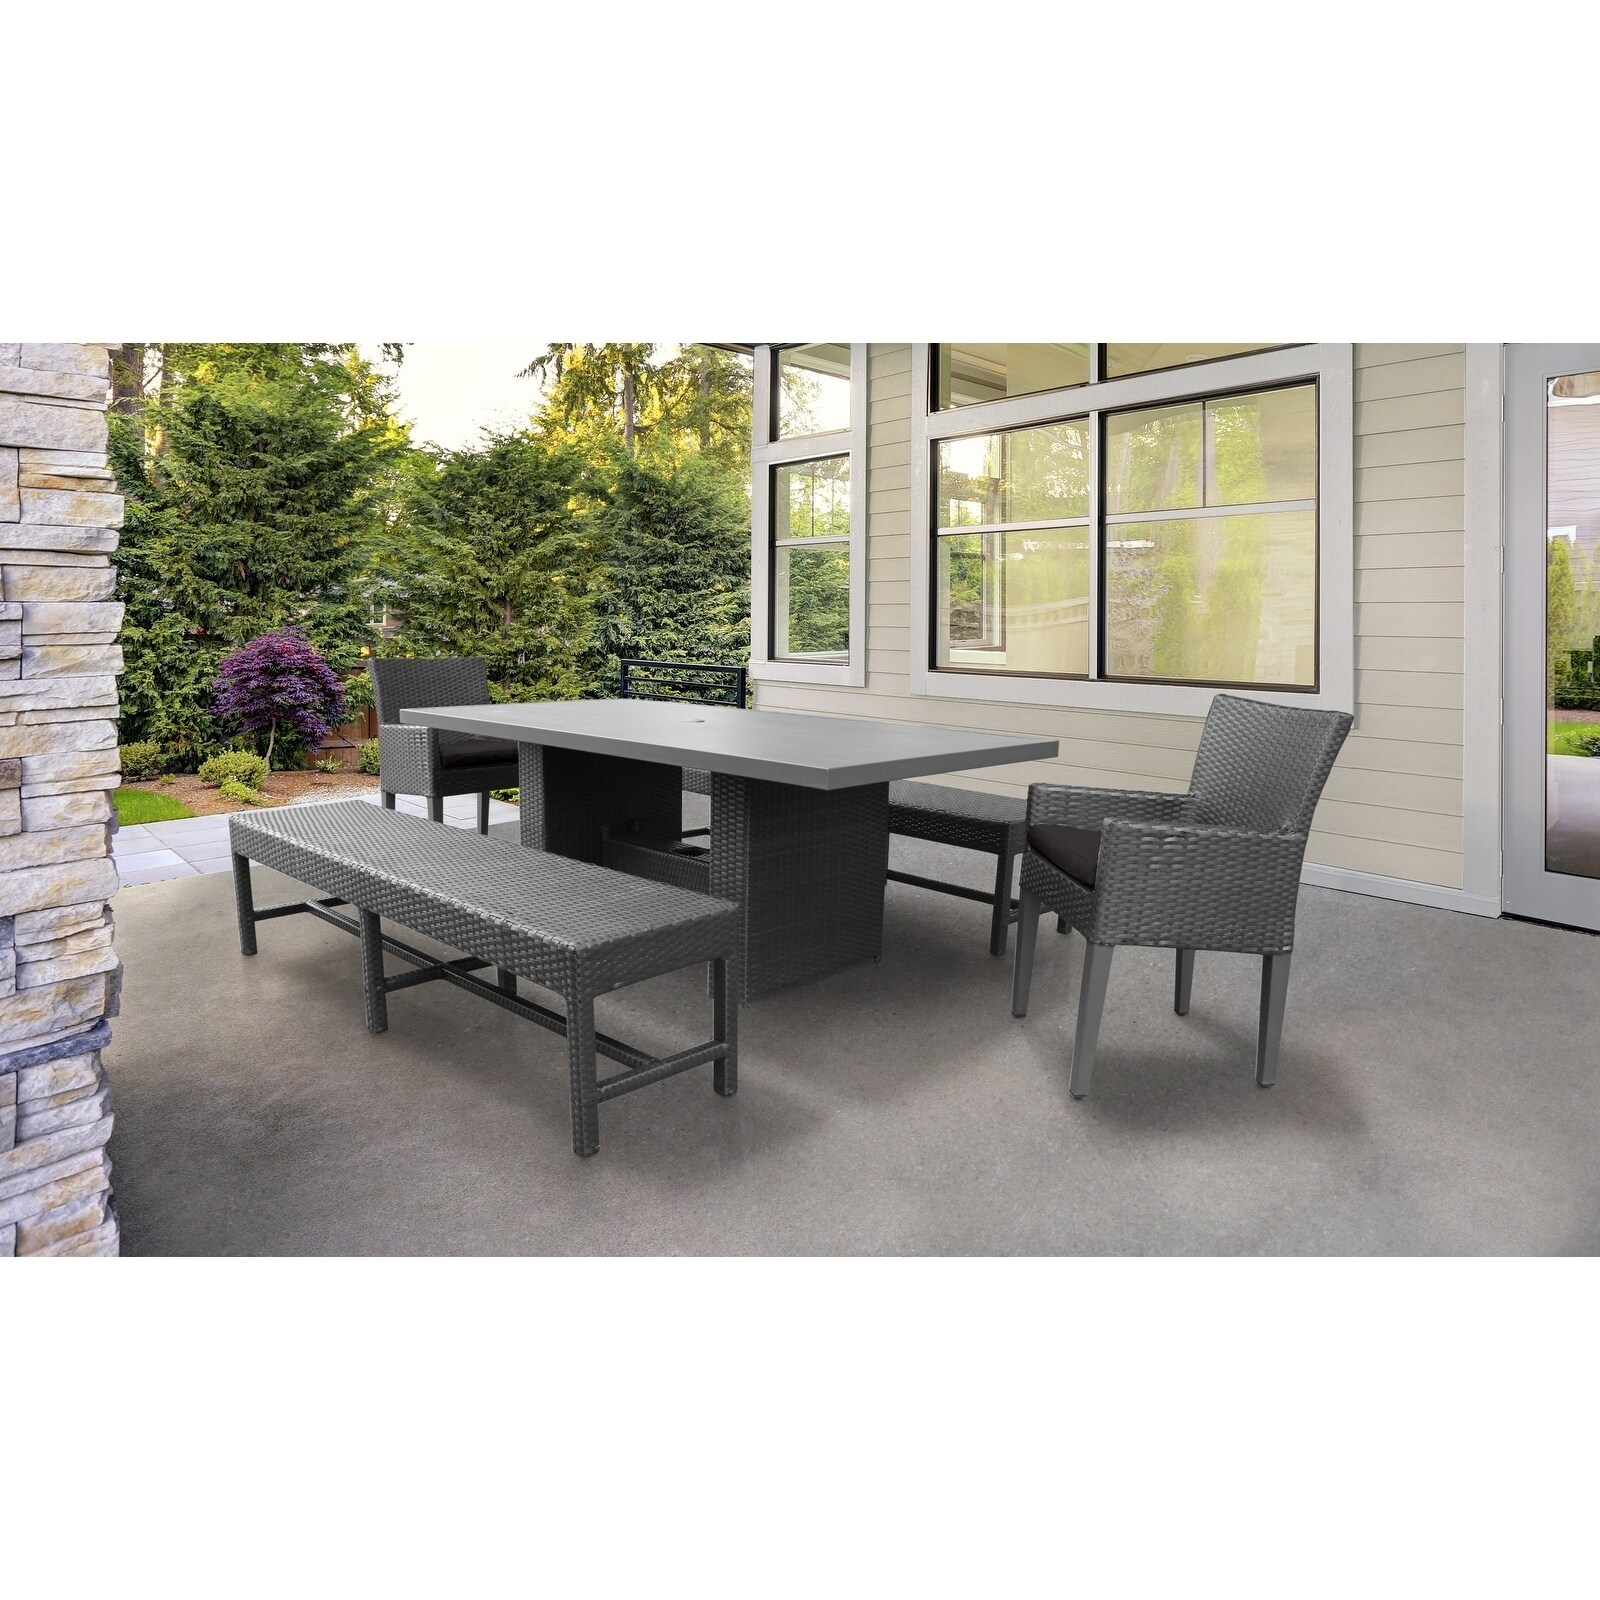 Barbados Rectangular Outdoor Patio Dining Table With 2 Chairs W/ Arms And 2 Benches